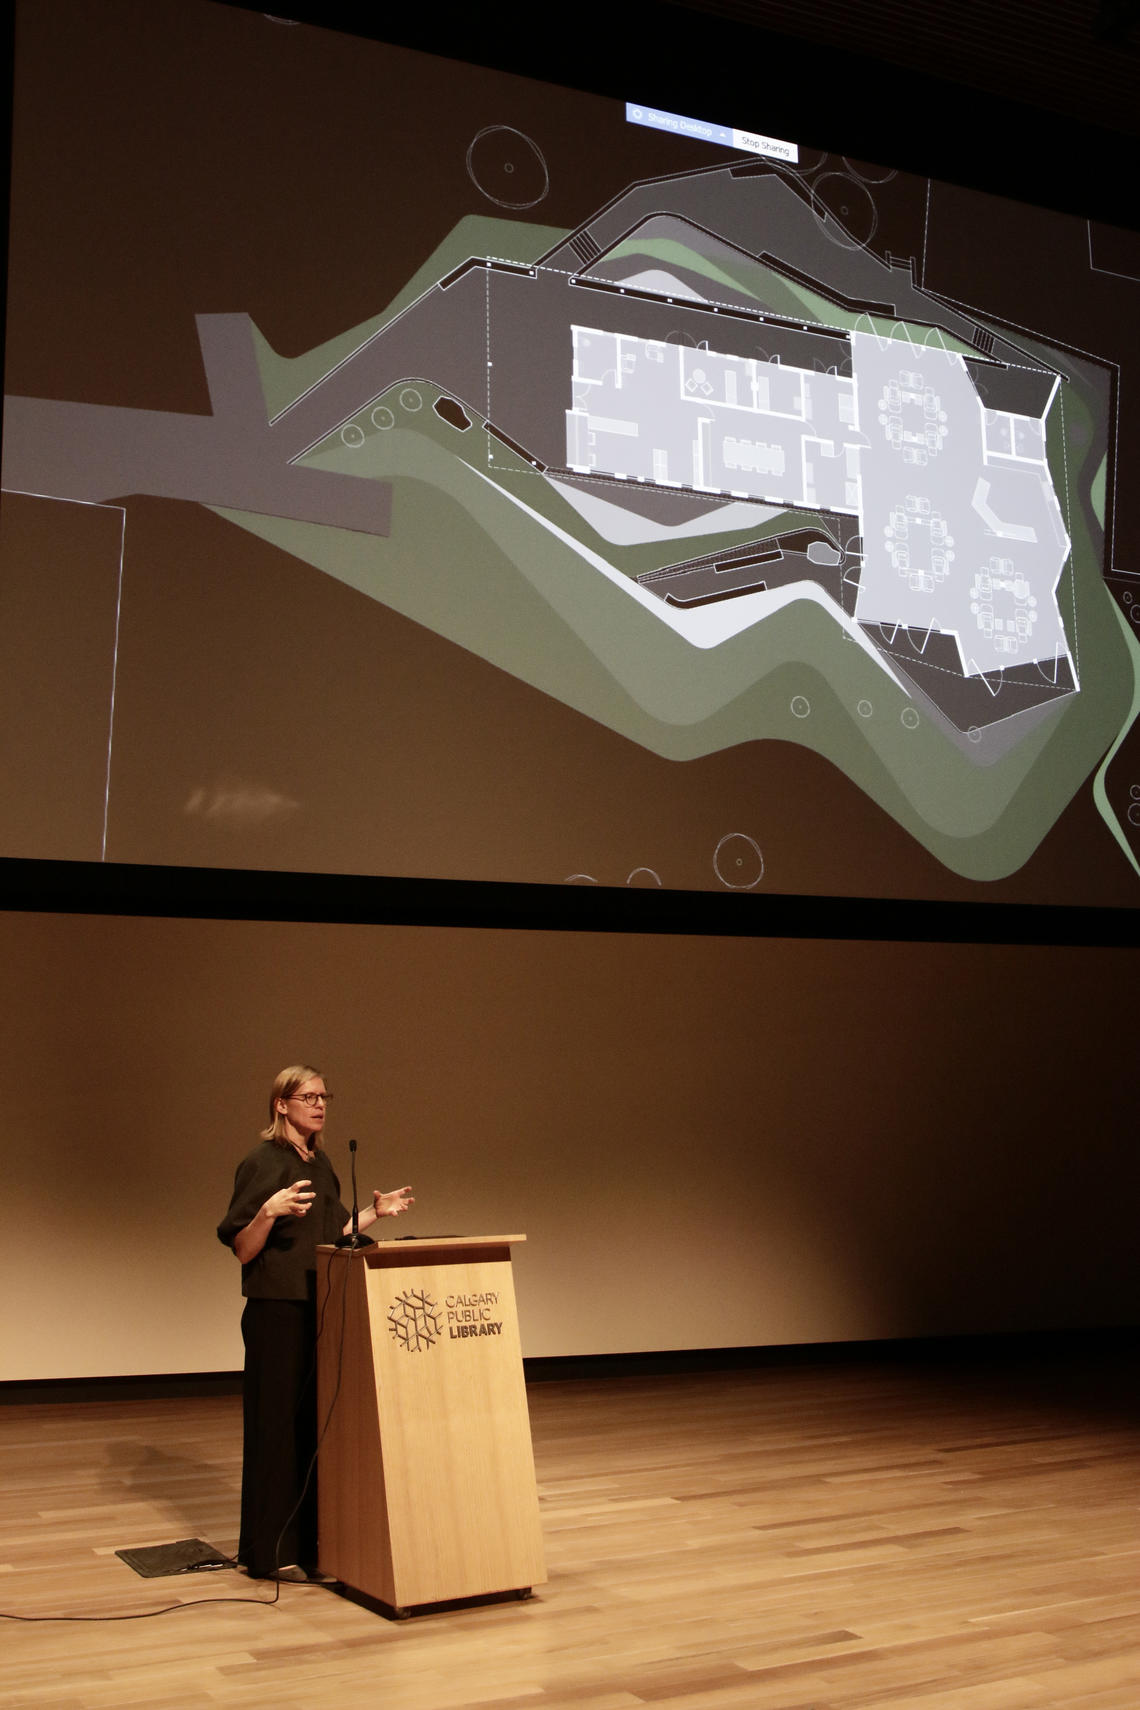 Sierra Bainbridge, speaker at the University of Calgary's Design Matters Lecture Series, addresses an audience at the New Central Library.